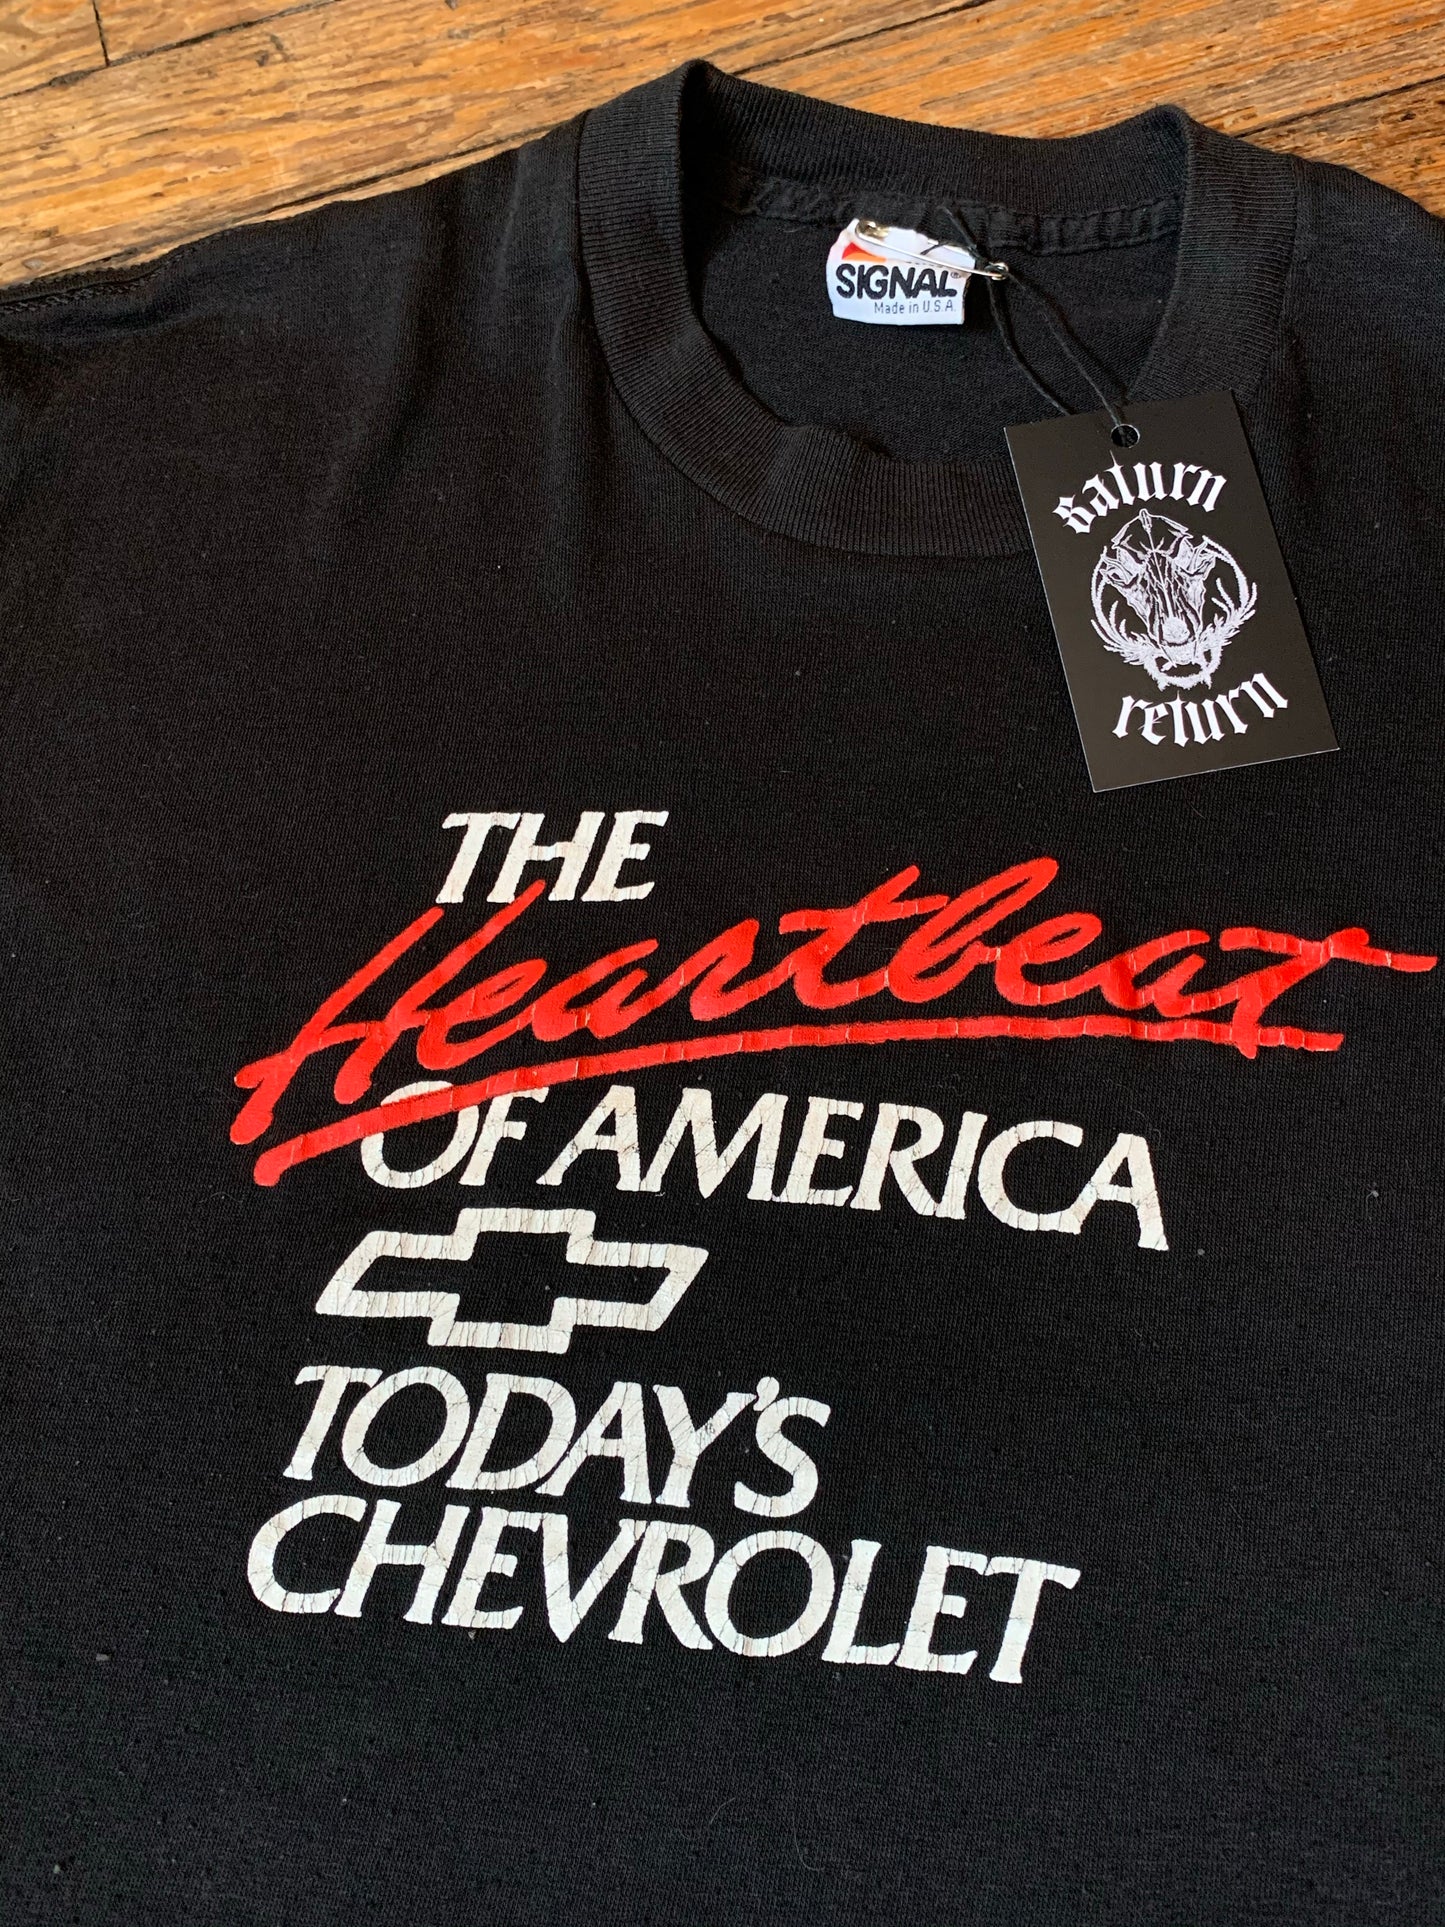 Vintage 80’s Chevy Chevrolet The Heartbeat of America T-Shirt